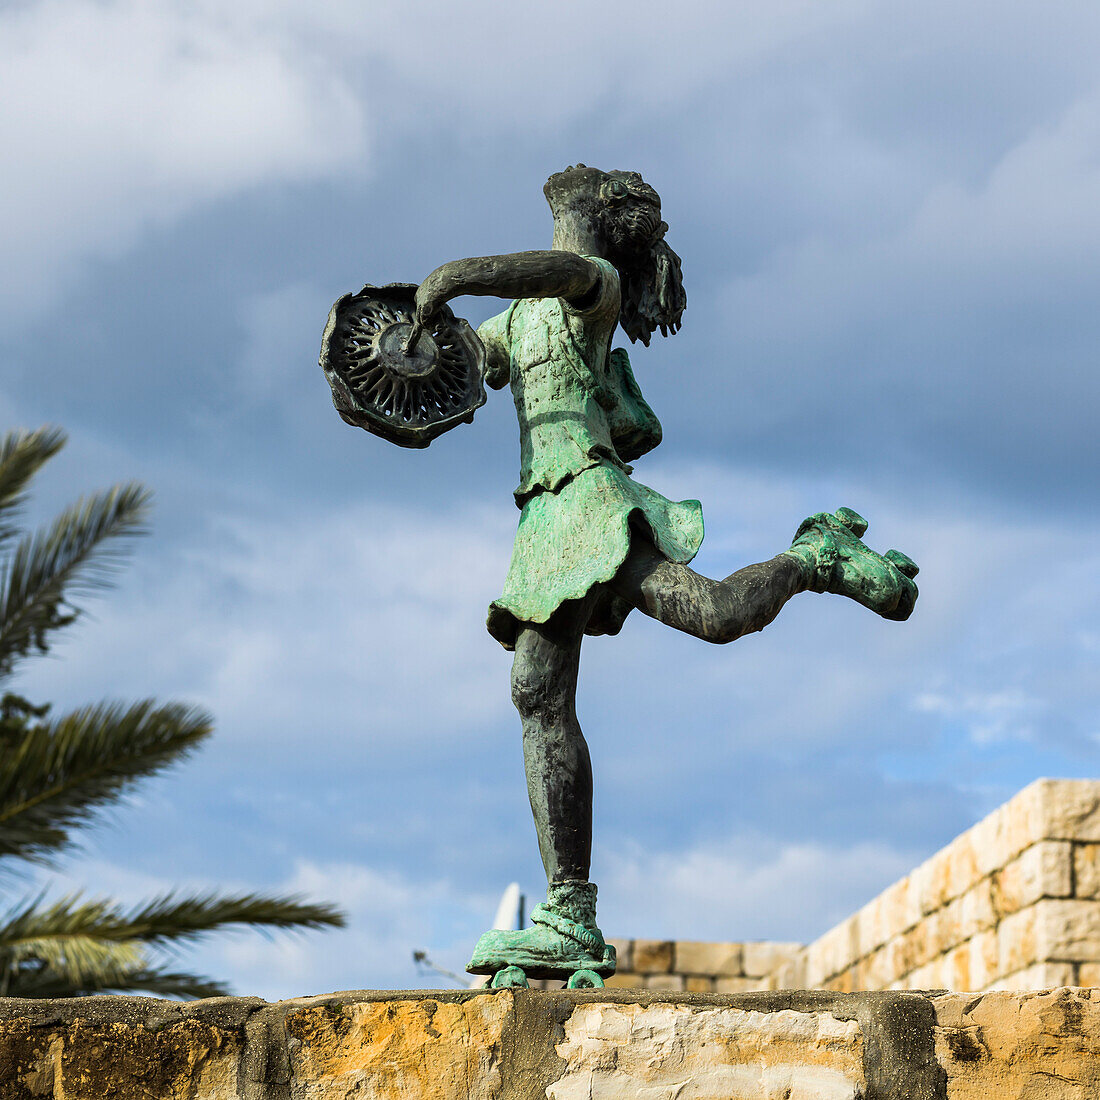 'Sculpture of a girl riding roller skates and playing with a toy; Ein Hod, Haifa District, Israel'